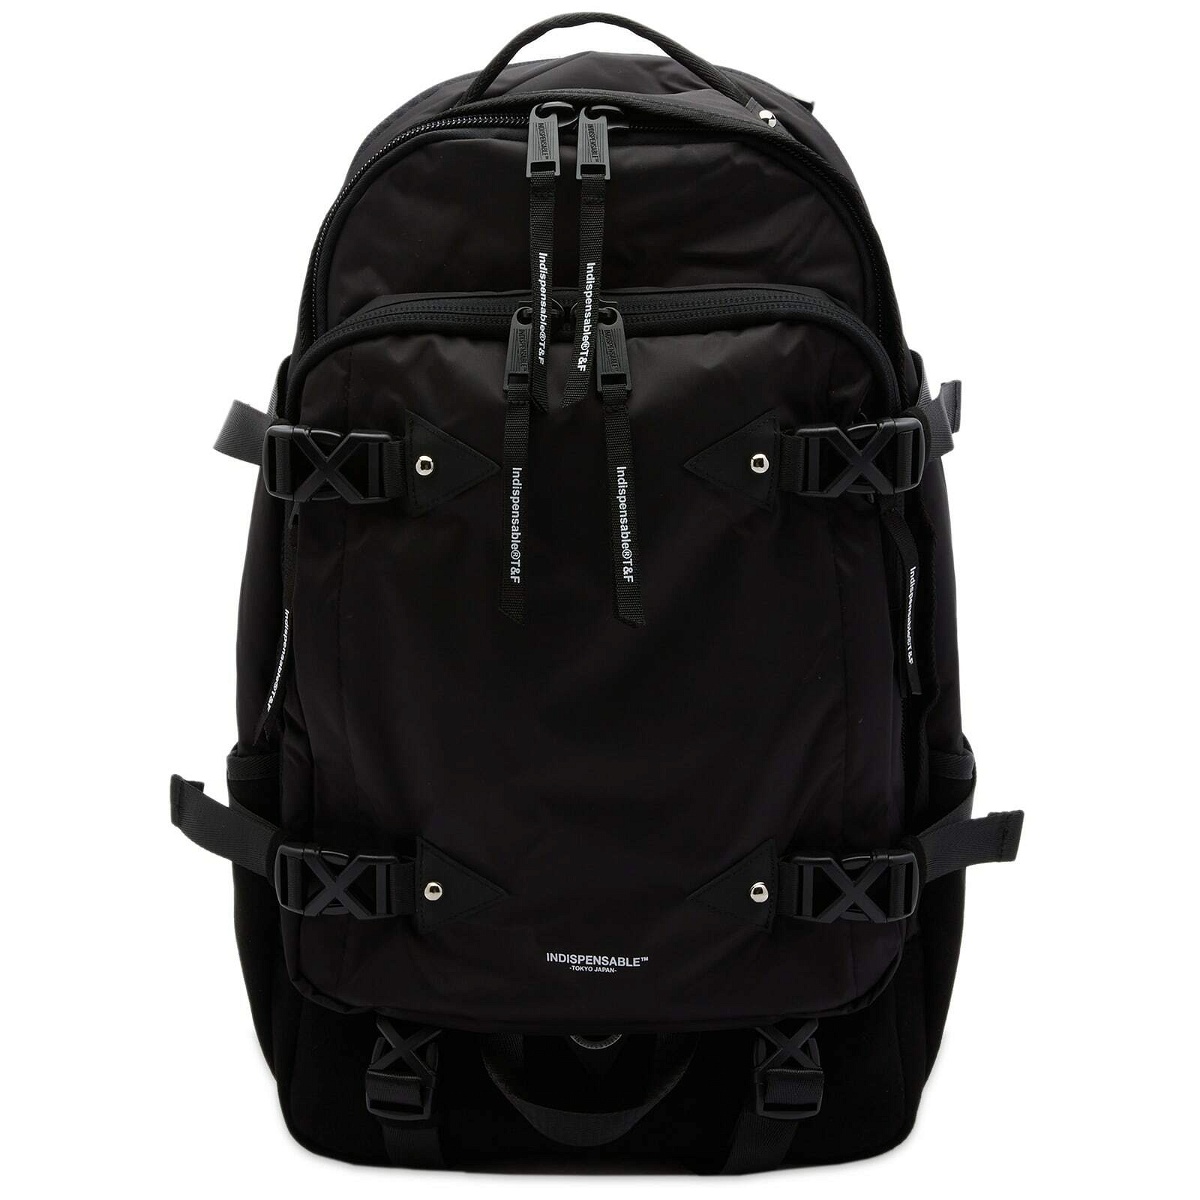 Photo: Indispensable Indispensible Brill+ Econyl Backpack in Black